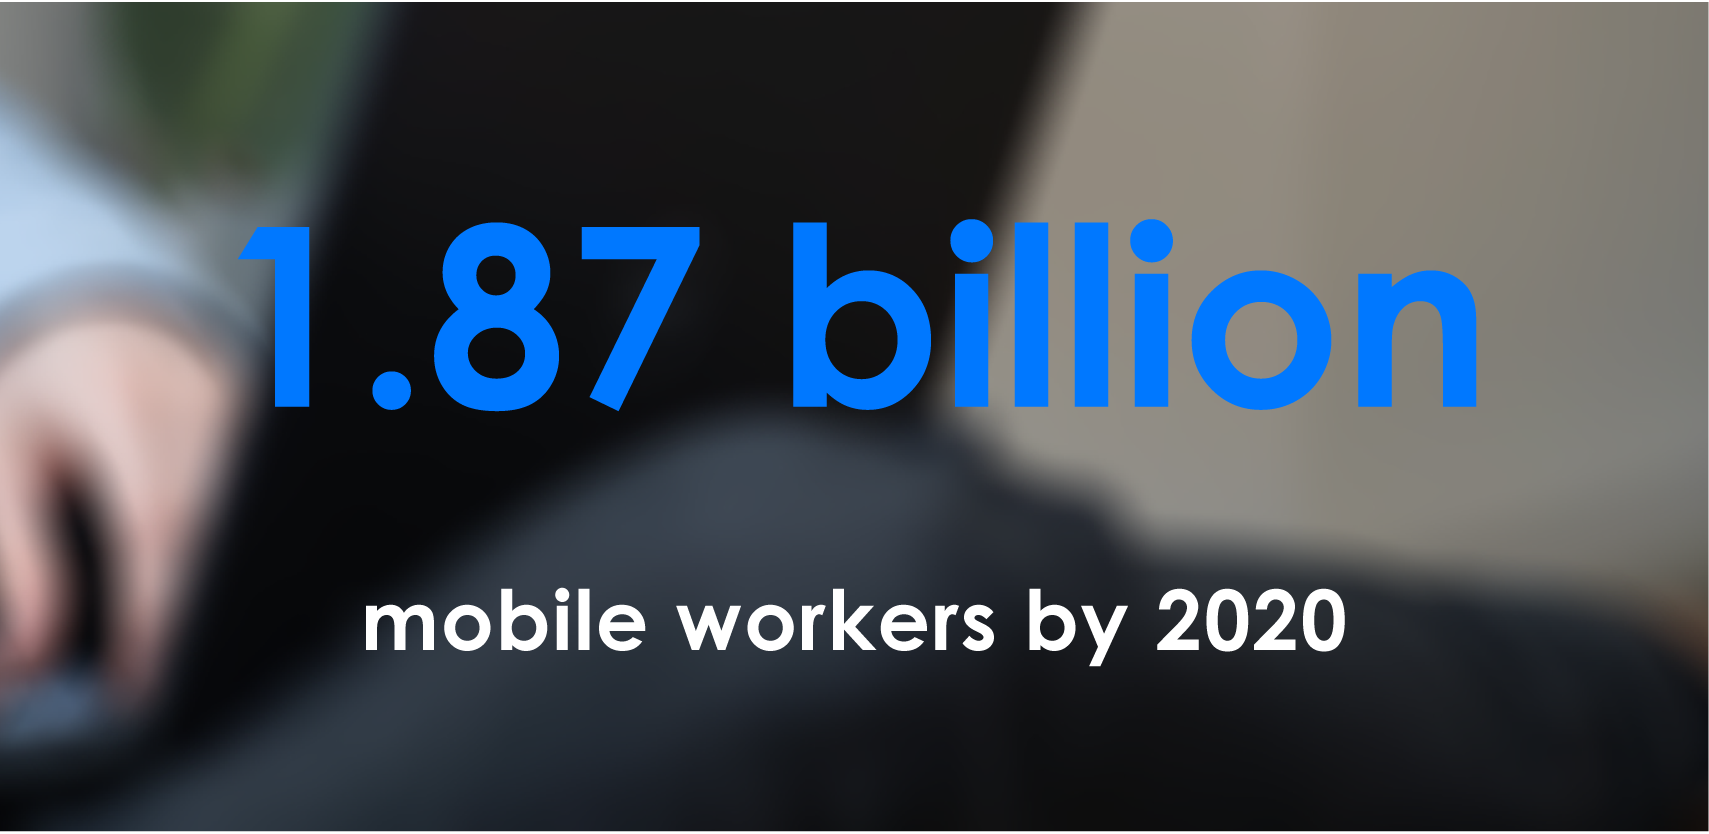 Blogpost-mobile-workplace-2020-01-01